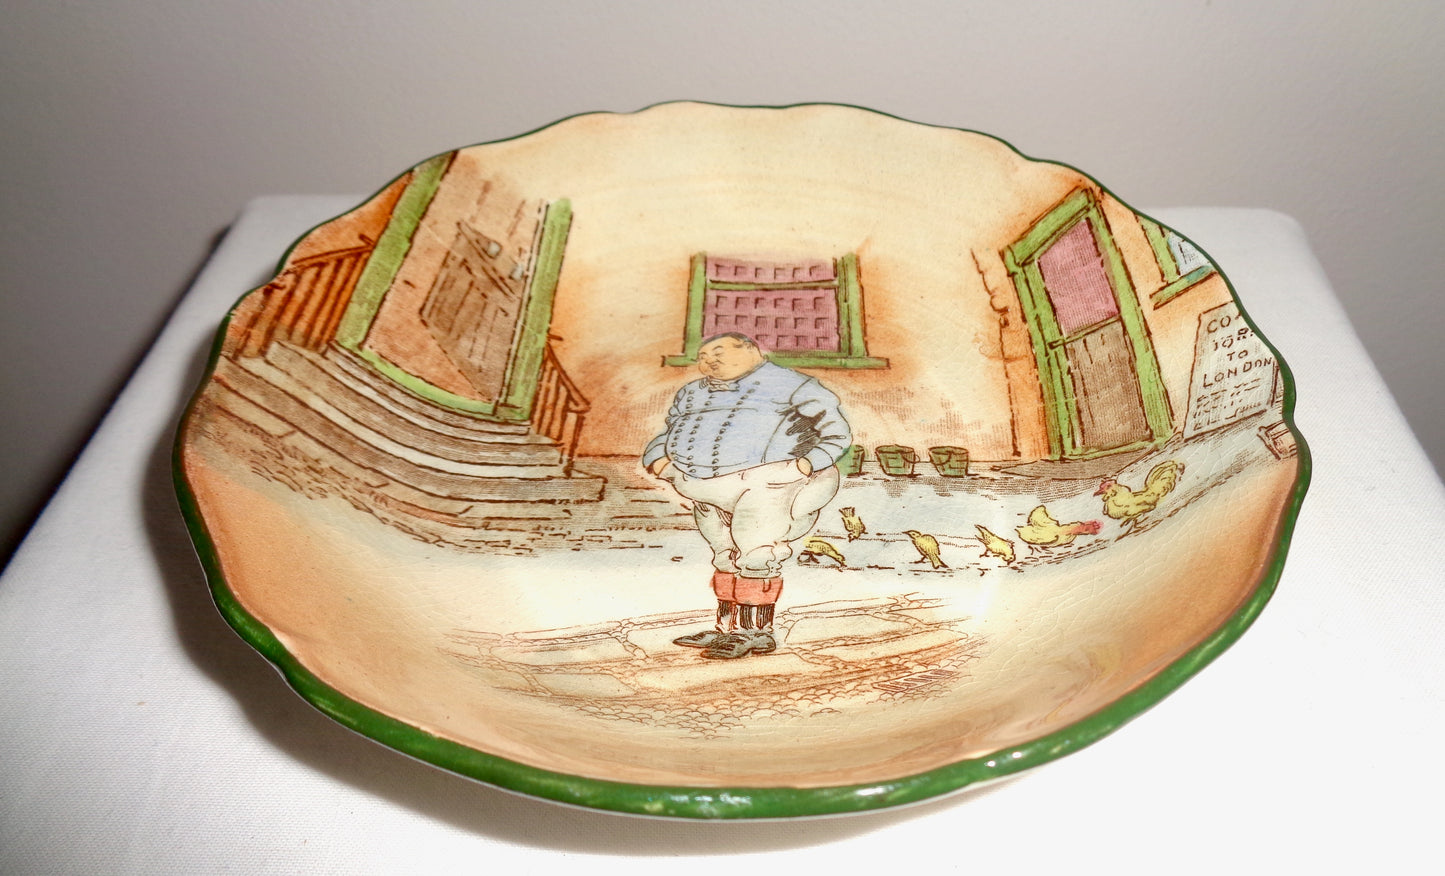 Royal Doulton Dickens Ware Berry Dish Pattern Number D2973 Featuring The Fat Boy